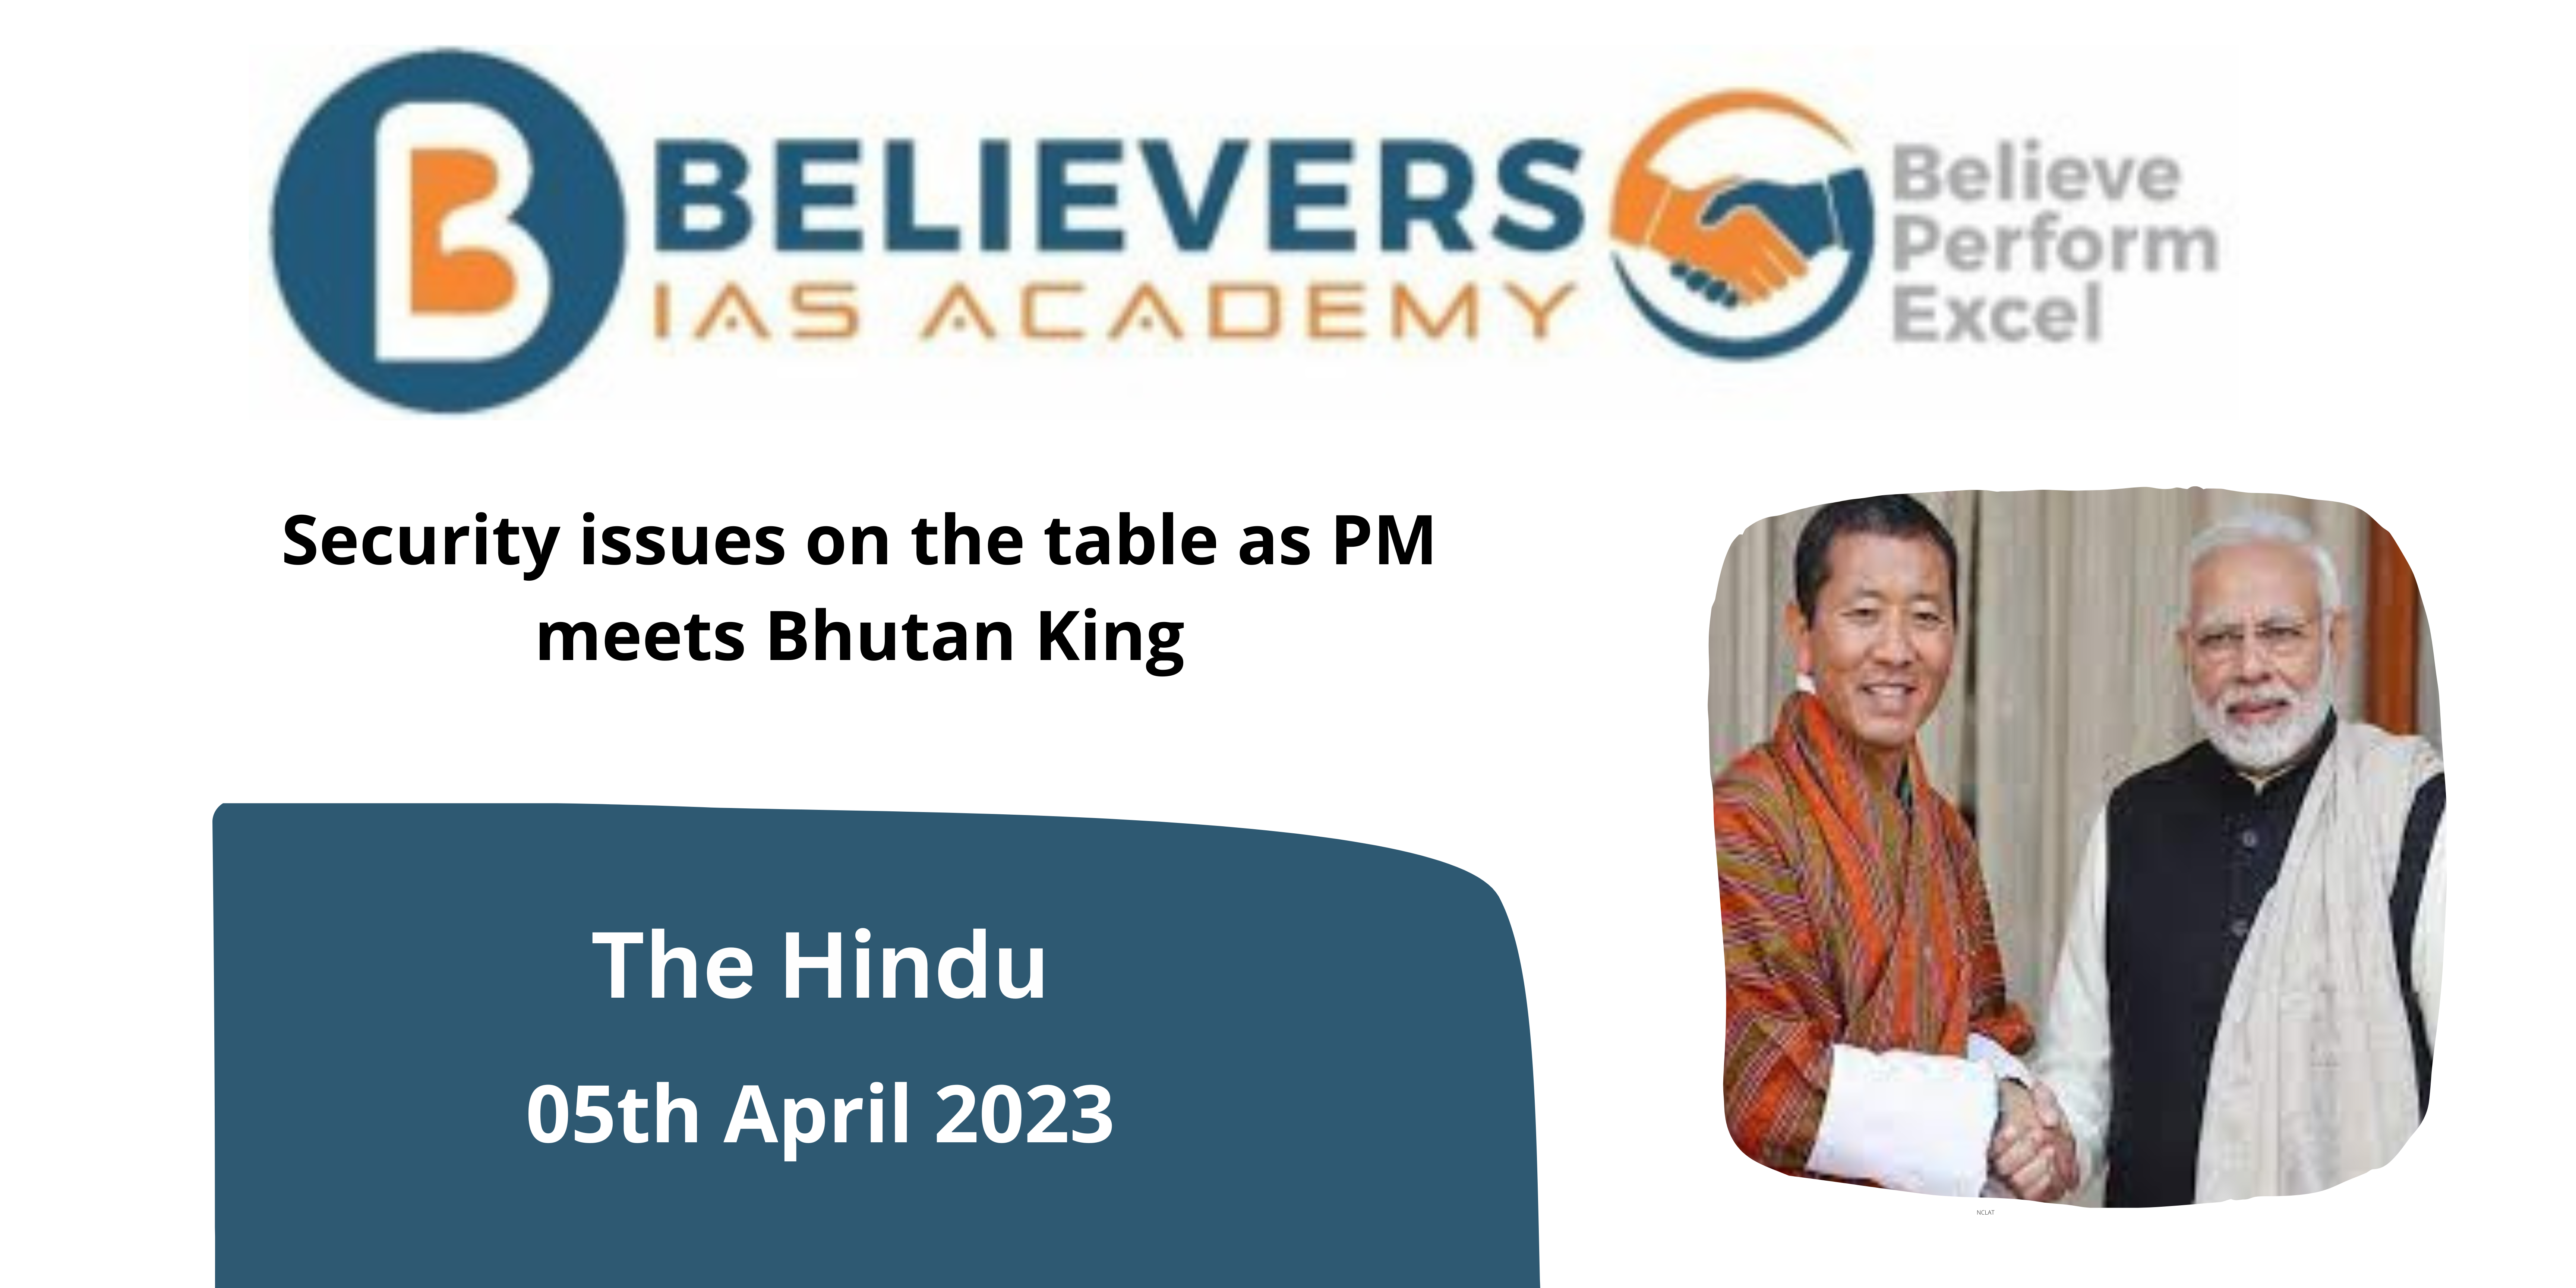 Security issues on the table as PM meets Bhutan King